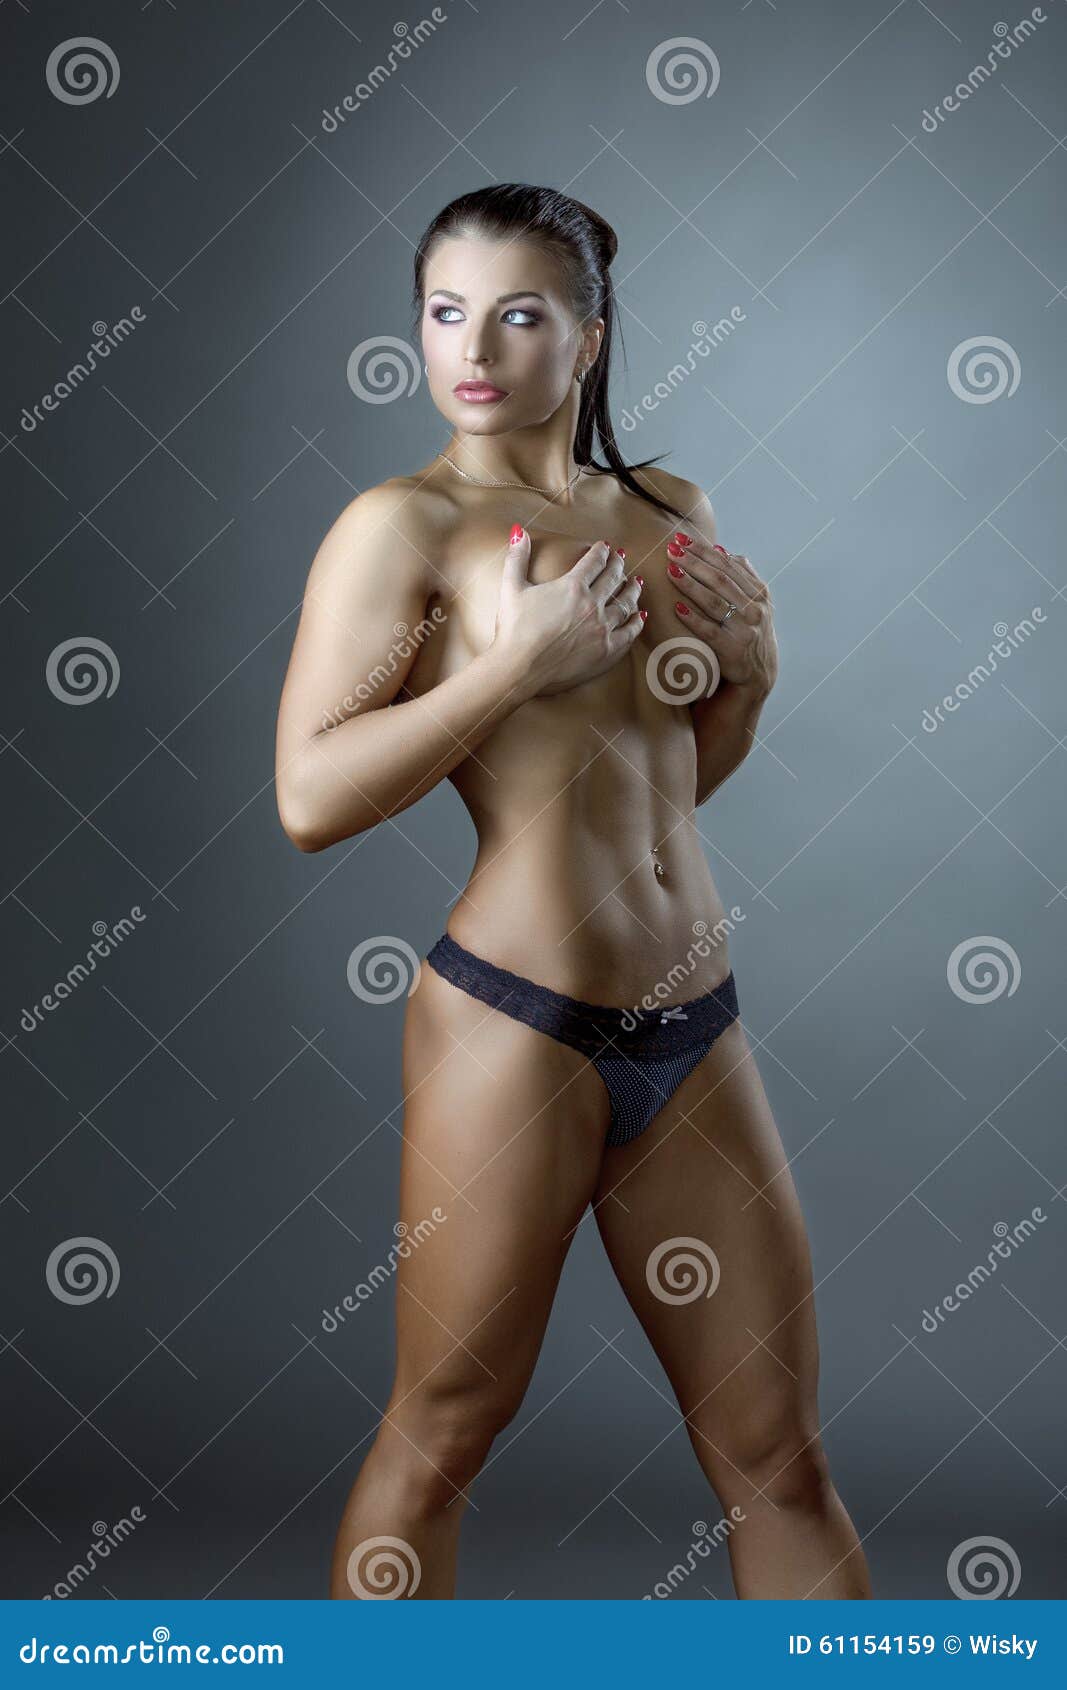 Bodybuilder Posing Covering Her Bare Breasts Stock Image - Image of adult,  energy: 61154159